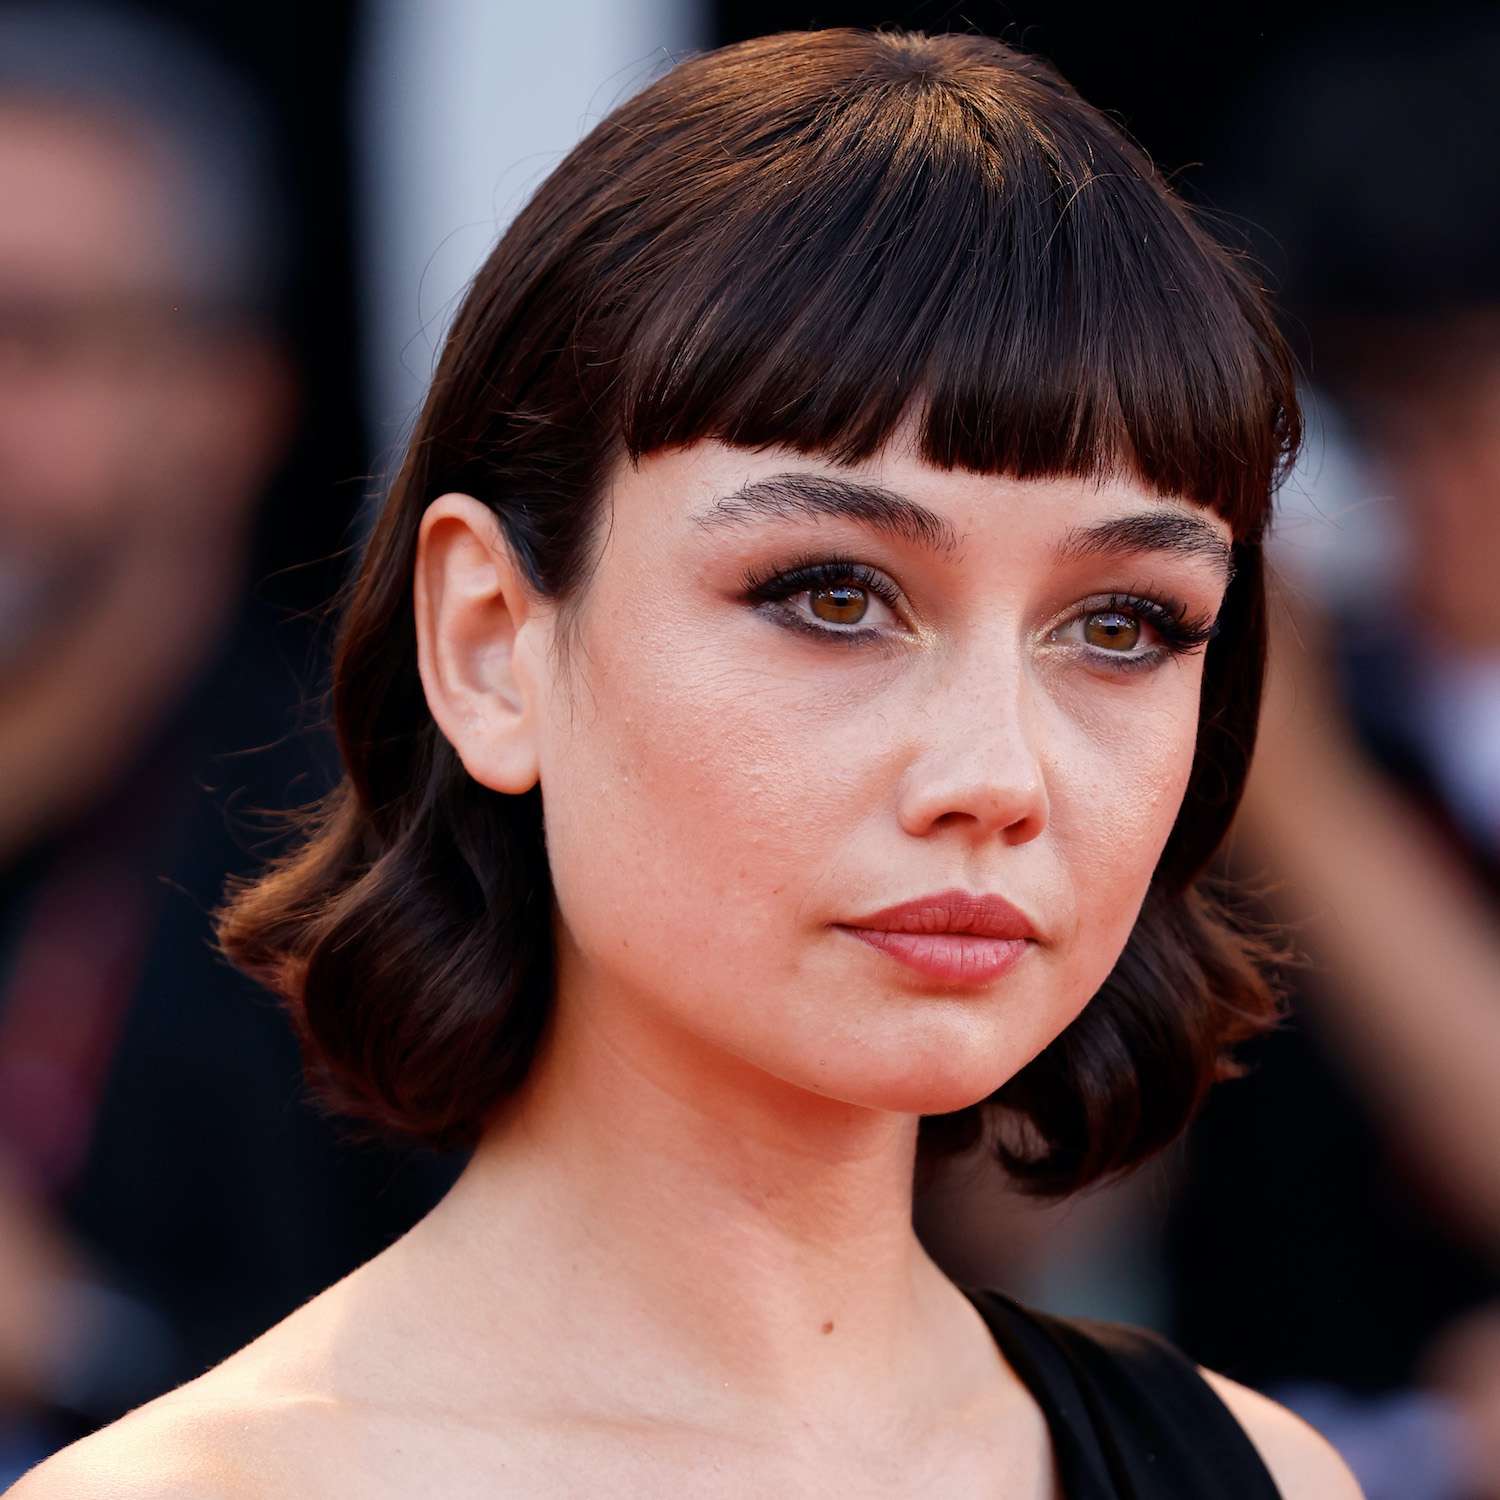 Sydney Chandler wears a curled bob hairstyle with baby bangs